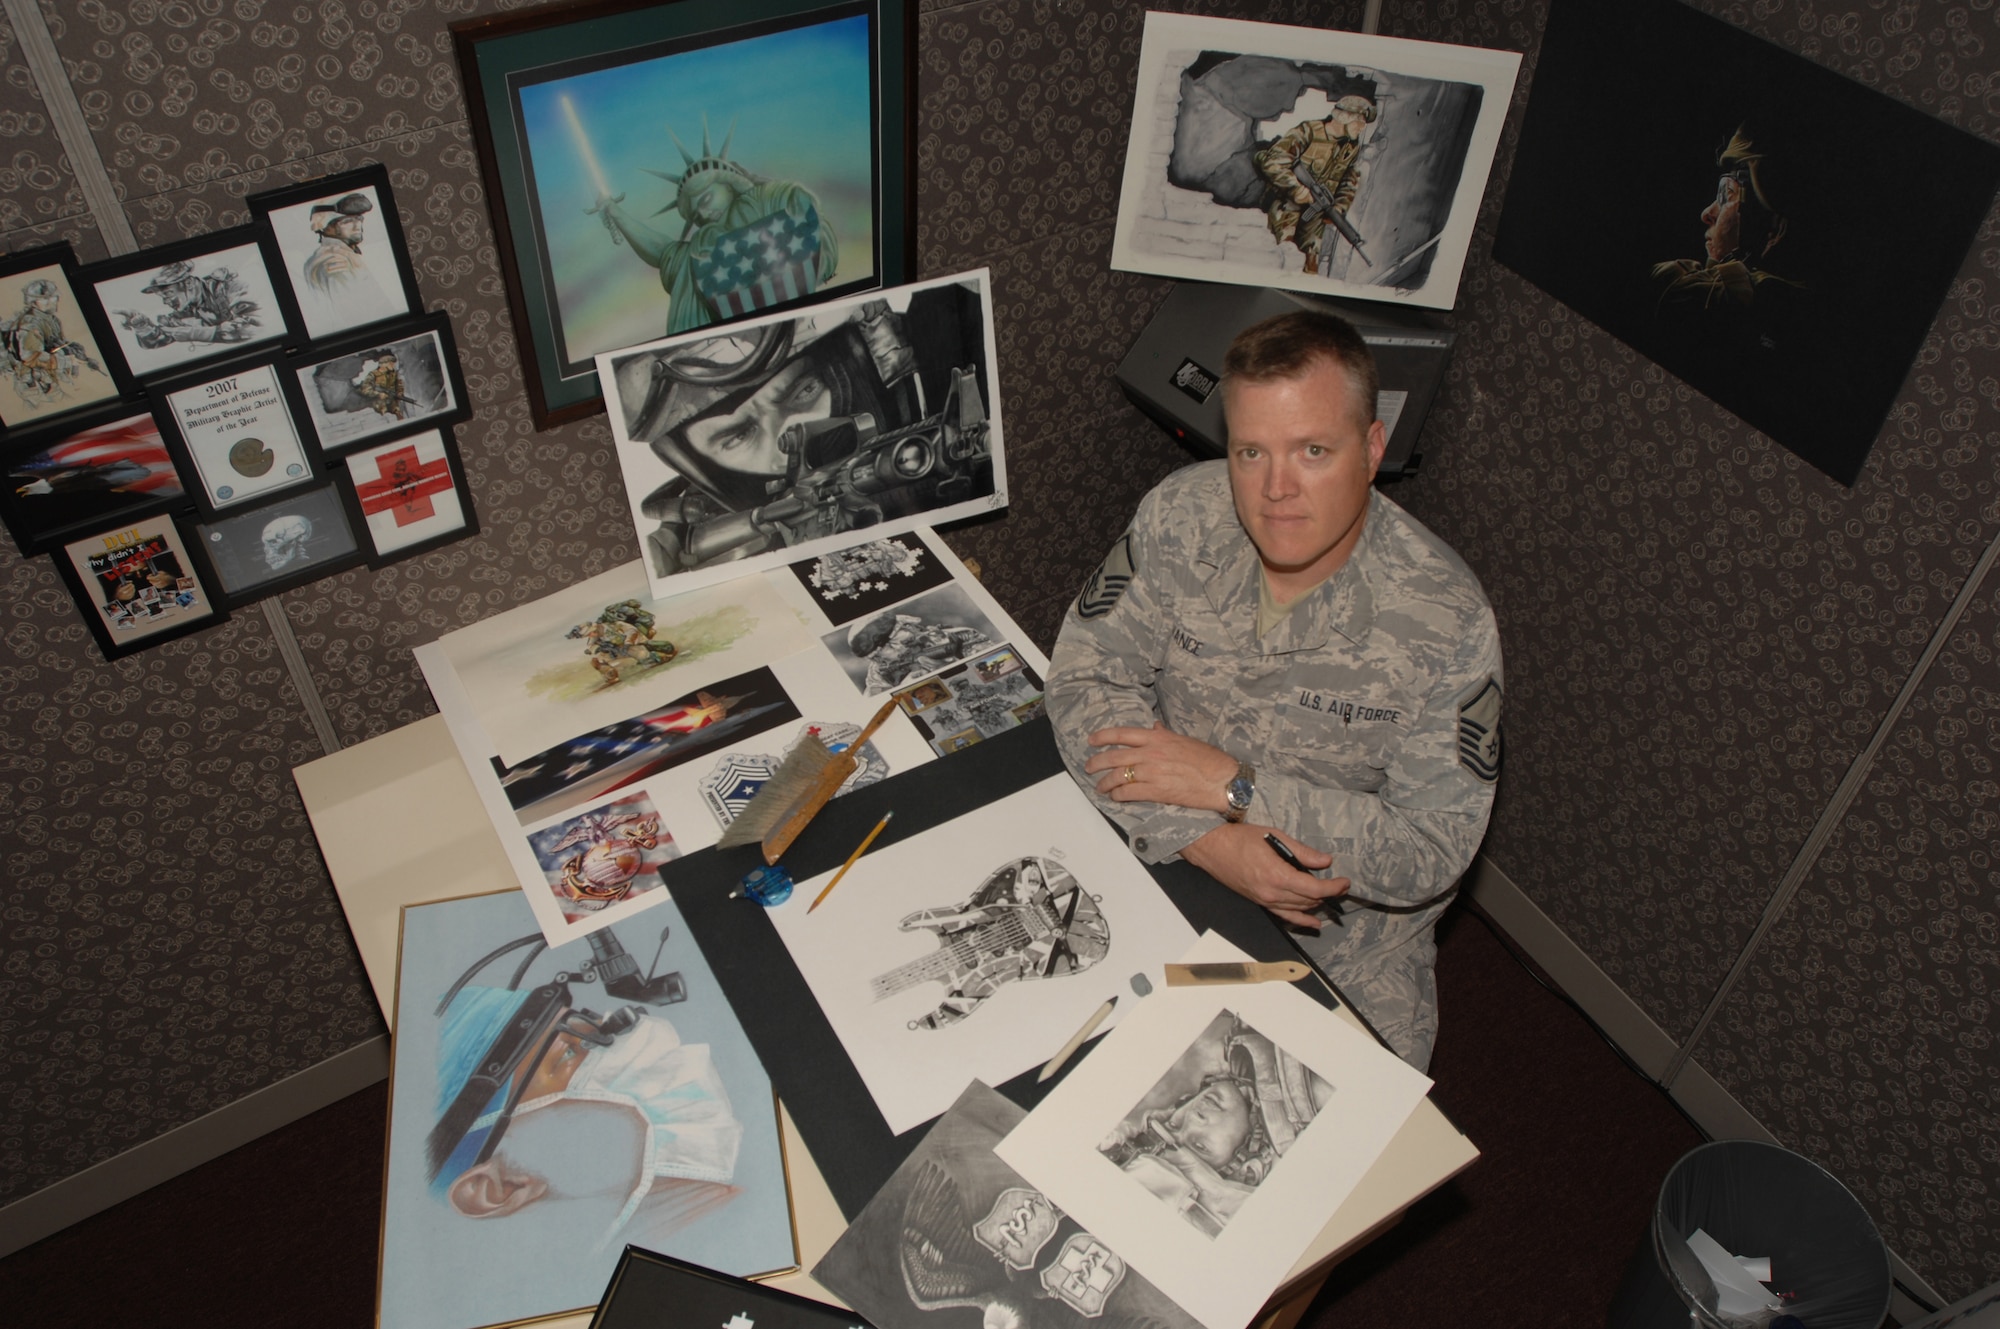 Master Sgt. William "Cody" Vance sits surrounded by his art, much of it award-winning.  Sergeant Vance, assigned to the 59th Medical Wing Medical Multimedia Center, is the recipient of the 2008 Military Graphic Artist of the Year for the second time in a row.  He is the last Senior Noncommissioned Officer in the Air Force's graphic arts career field. (U.S. Air Force photo/Senior Airman Robert Barnett)